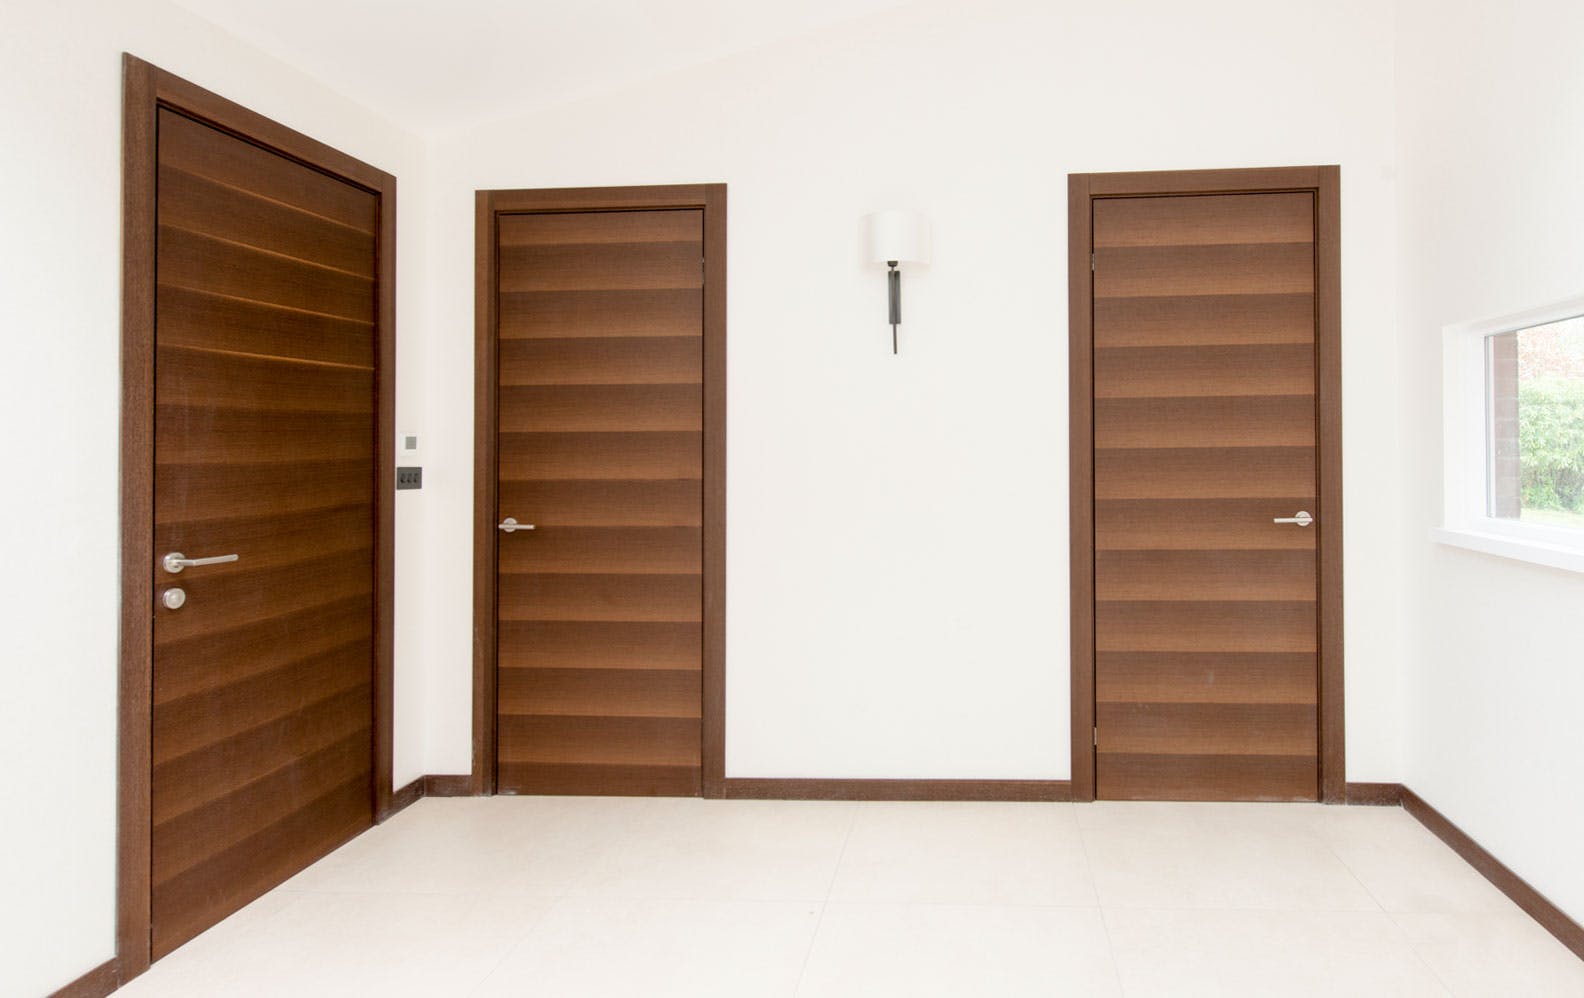 Light and spacious hallway with three modern internal door sets by Deuren - Trem H style, Wenge finish.